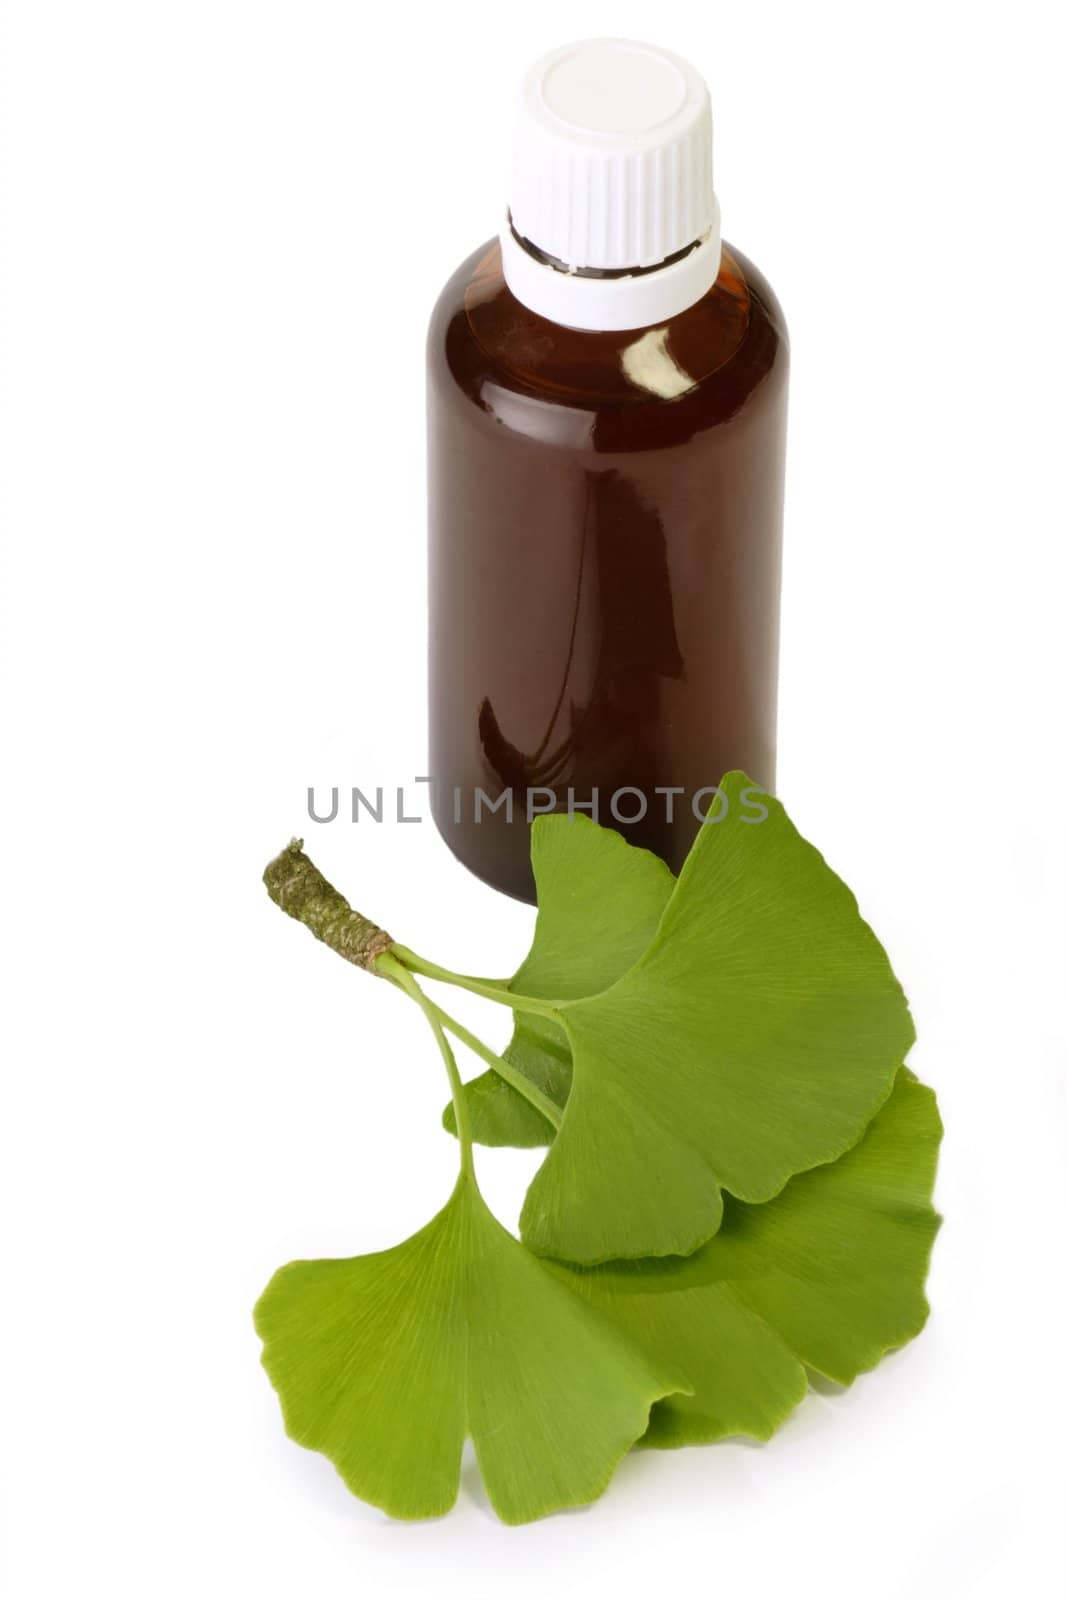 Medicine flasc and ginkgo leaves - isolated on white background